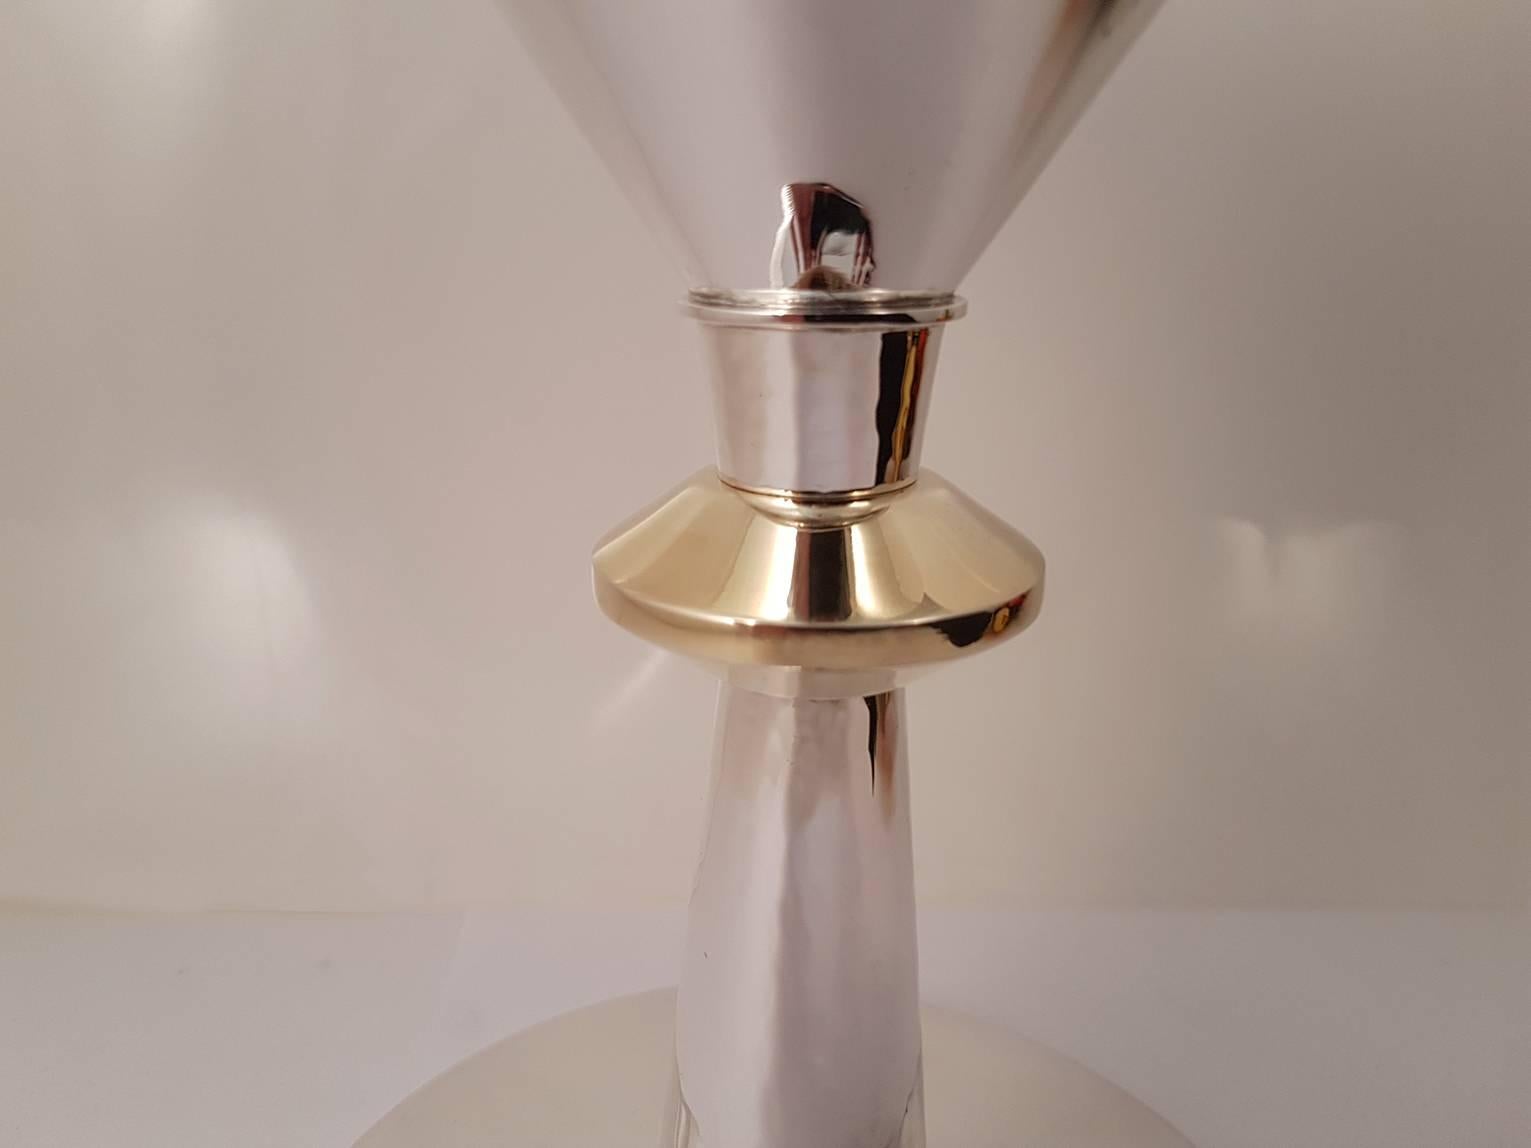 Large 925 sterling silver ecclesiastical Chalice made in Italy in Art Deco style.
The base is a circular form, flat and slightly hammered, with a golden silver cross in the middle.
The central knot is gilded as the inside of the cup.
The stem and